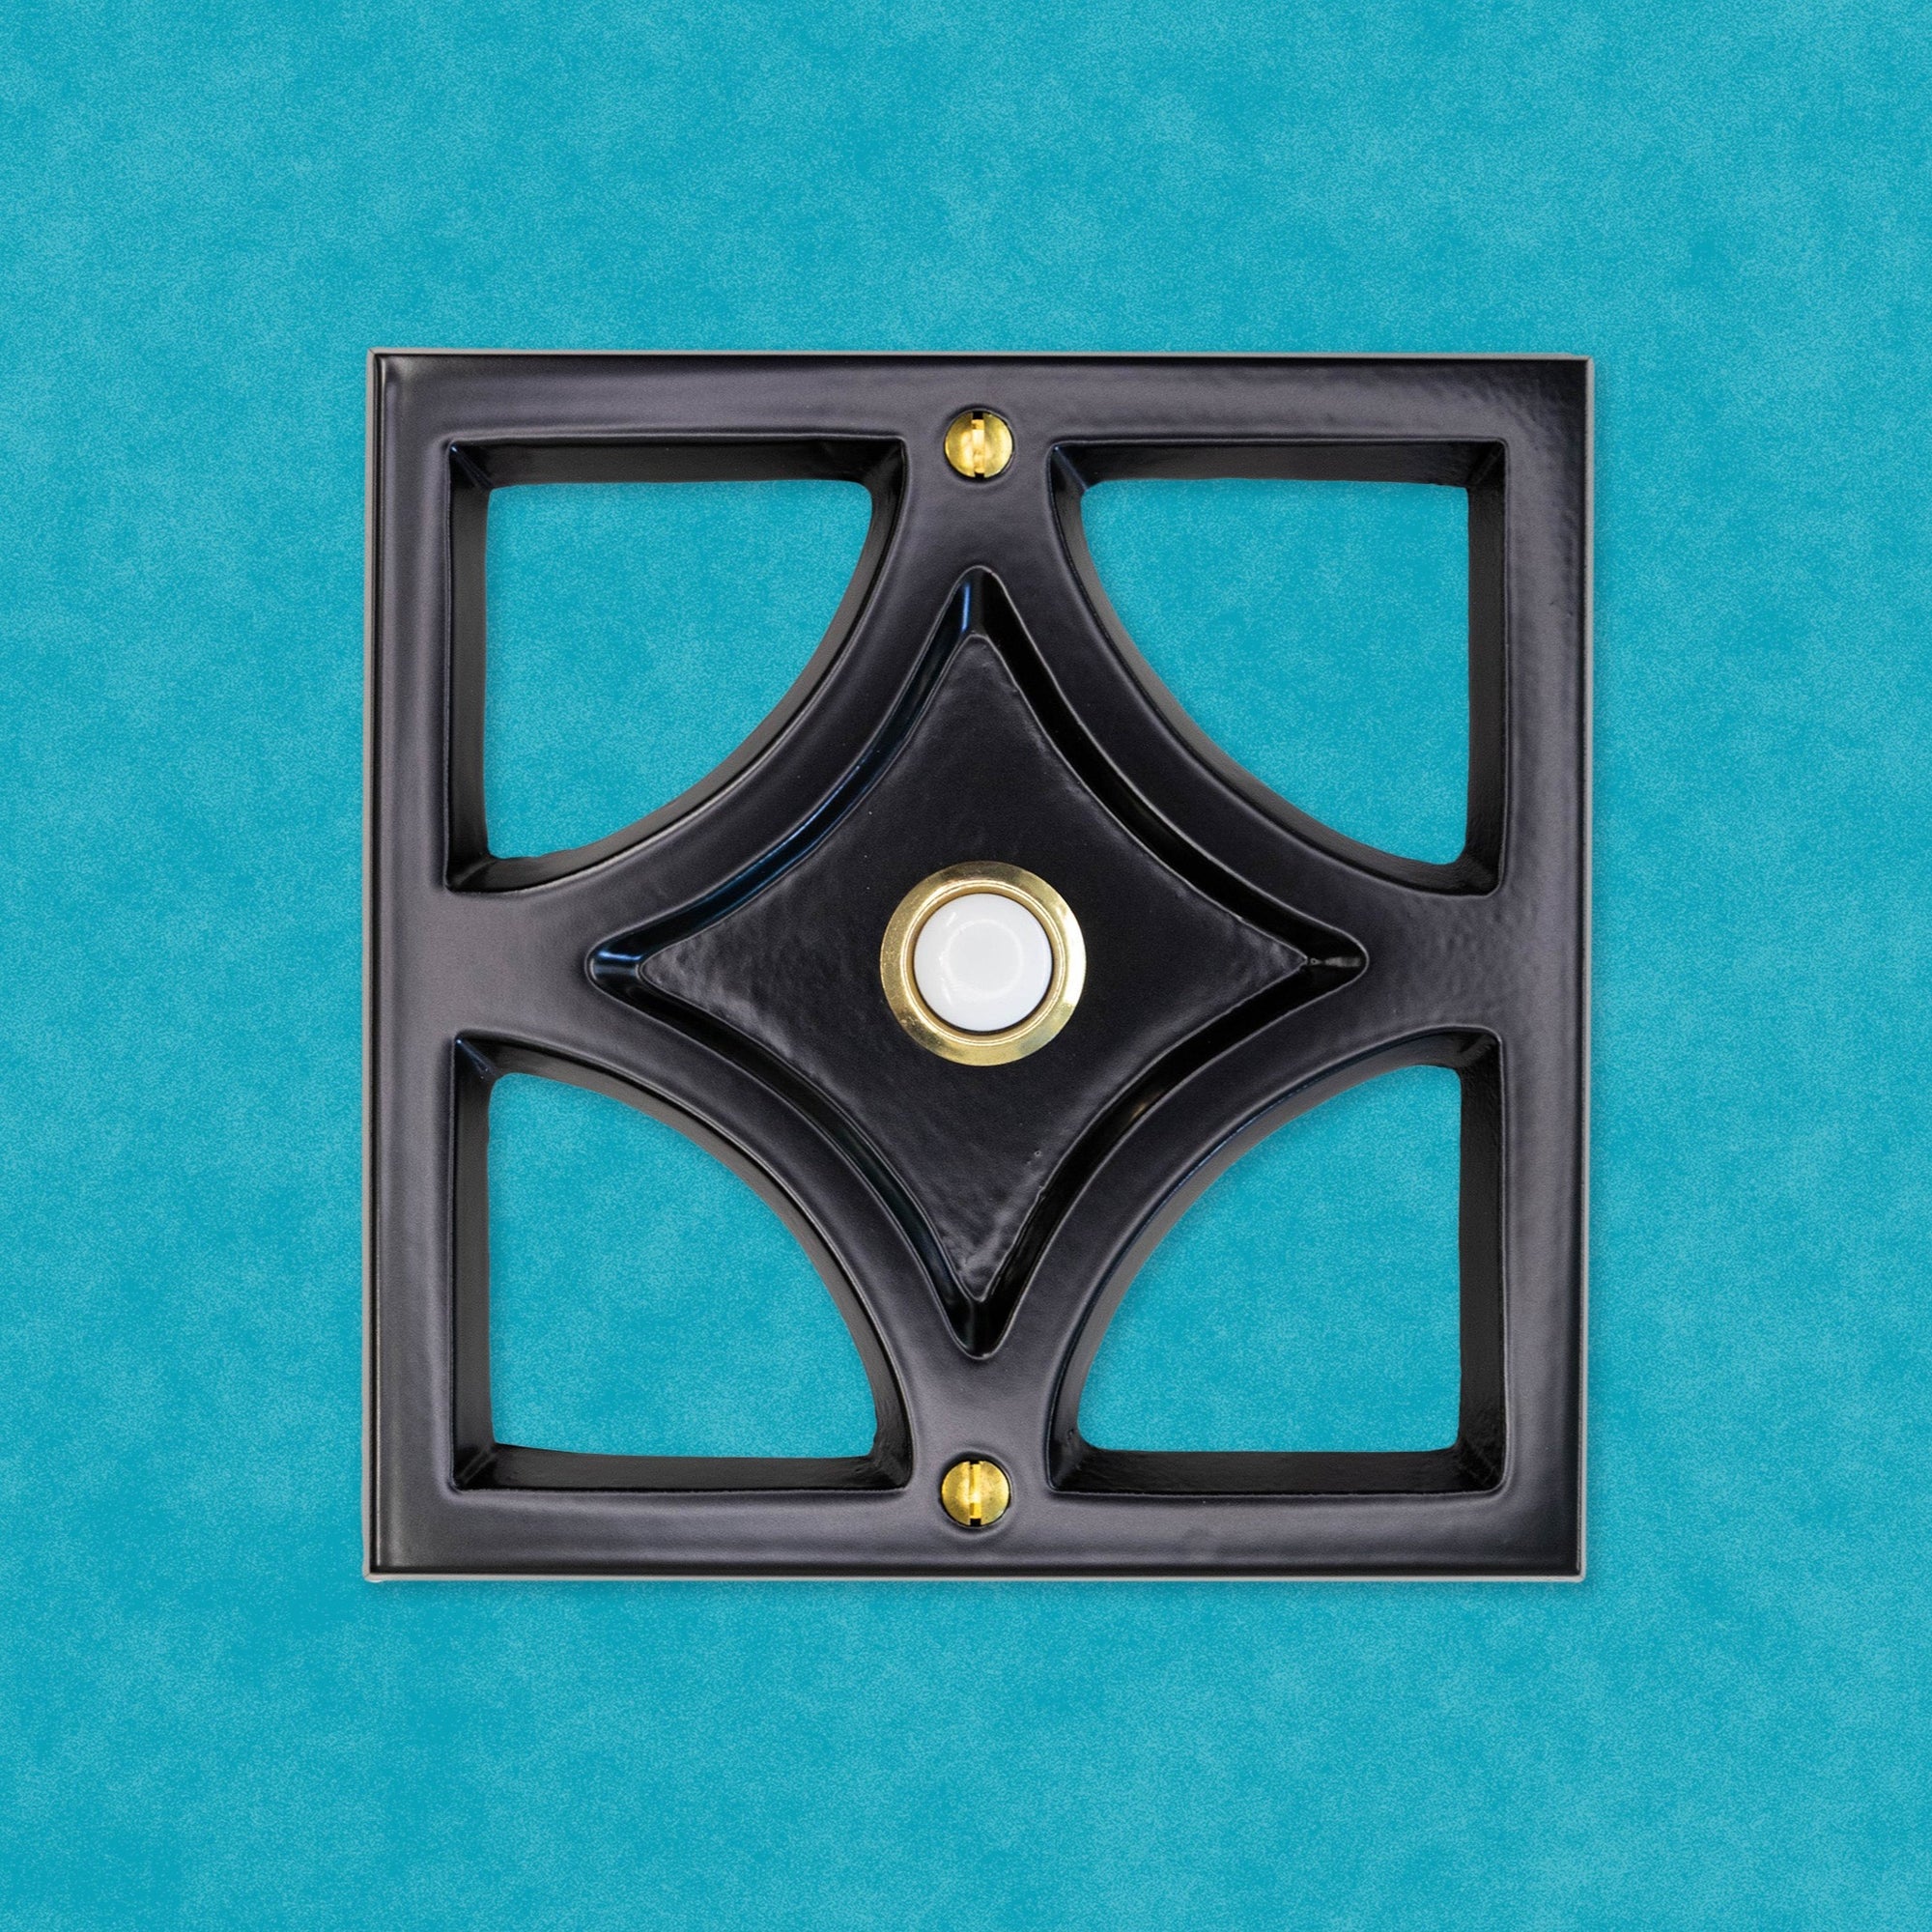 A black powder coated cast aluminum breeze block with a gold rimmed door bell button and screws. The breeze block design is a square around the outside, then inside is a diamond shape leaving 4 hollow corners. The middle of the diamond is sunken in and that is where the doorbell button is. There are two gold screws, one at the top and bottom of the square. The black powder coating is matte, so it is smooth and reflects light but is does not give a glossy shine.